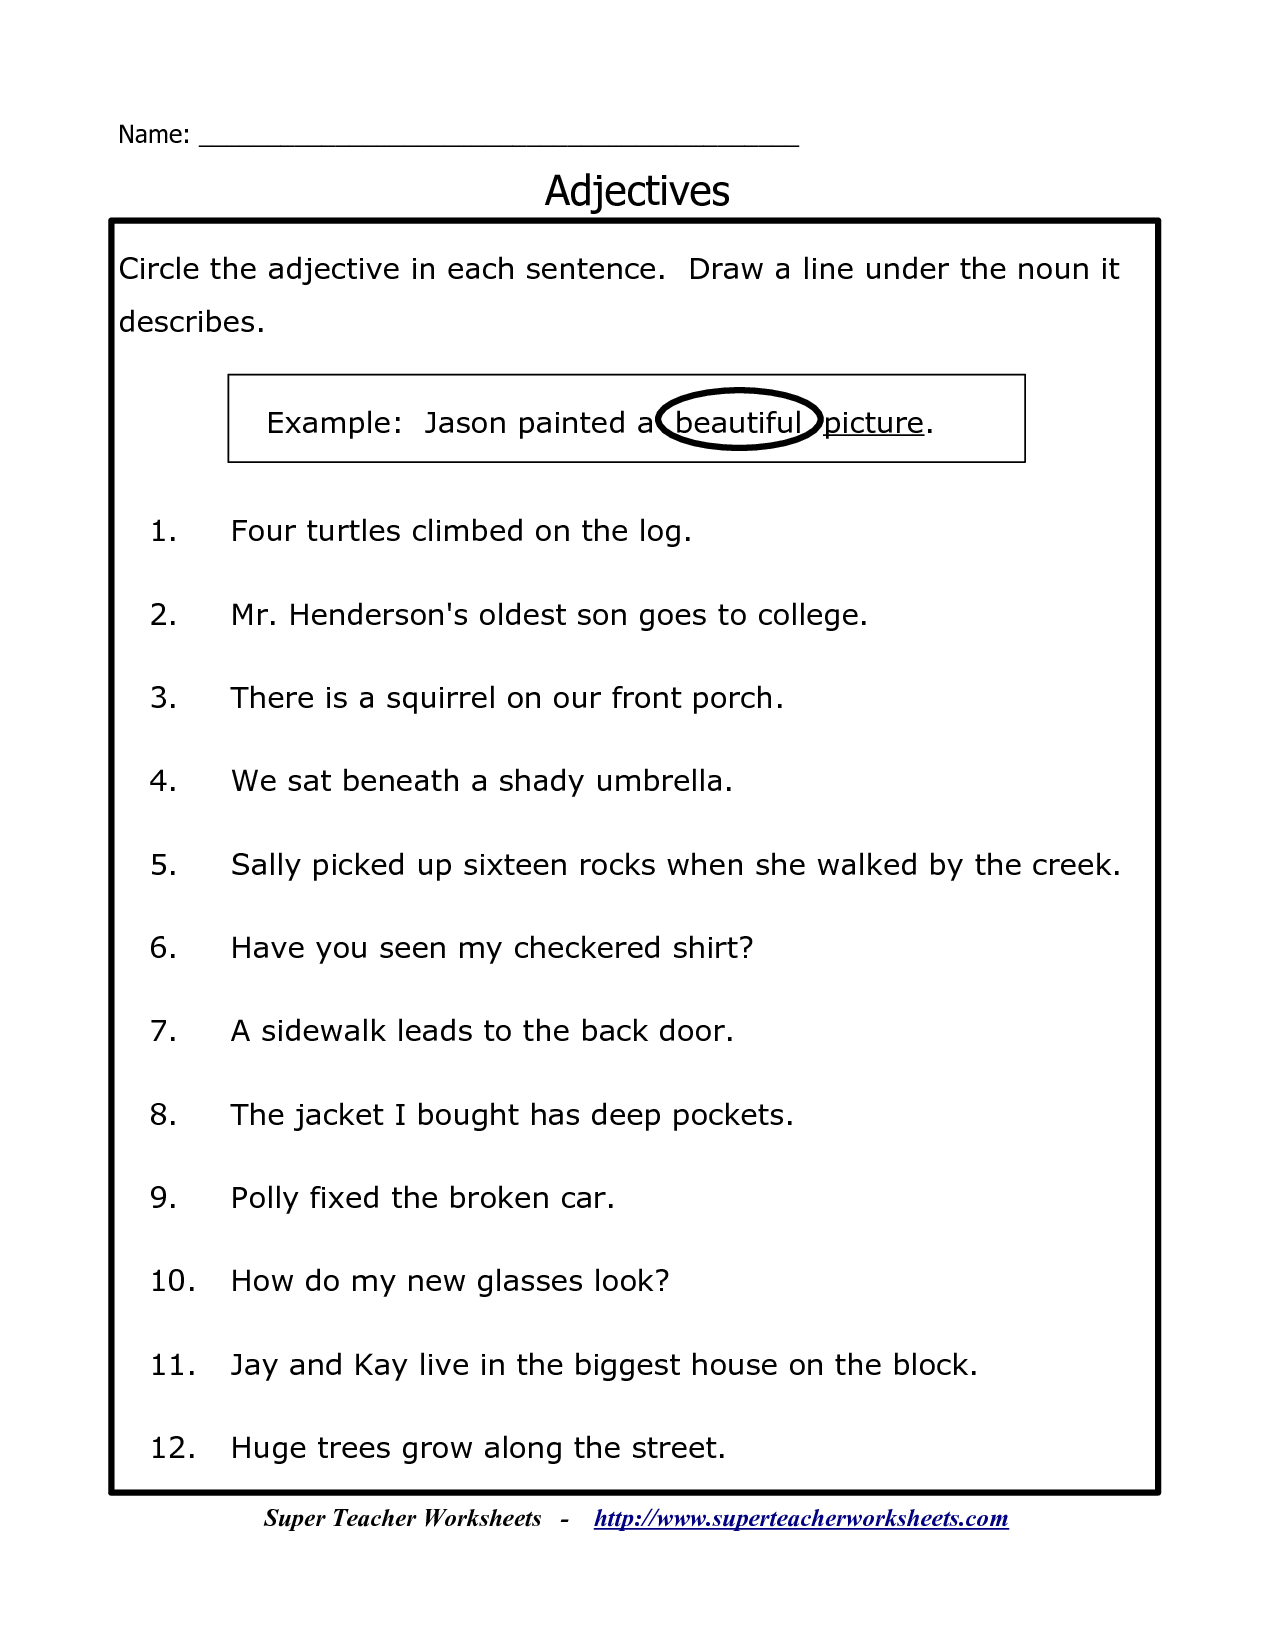 worksheet adjectives and adverbs pdf